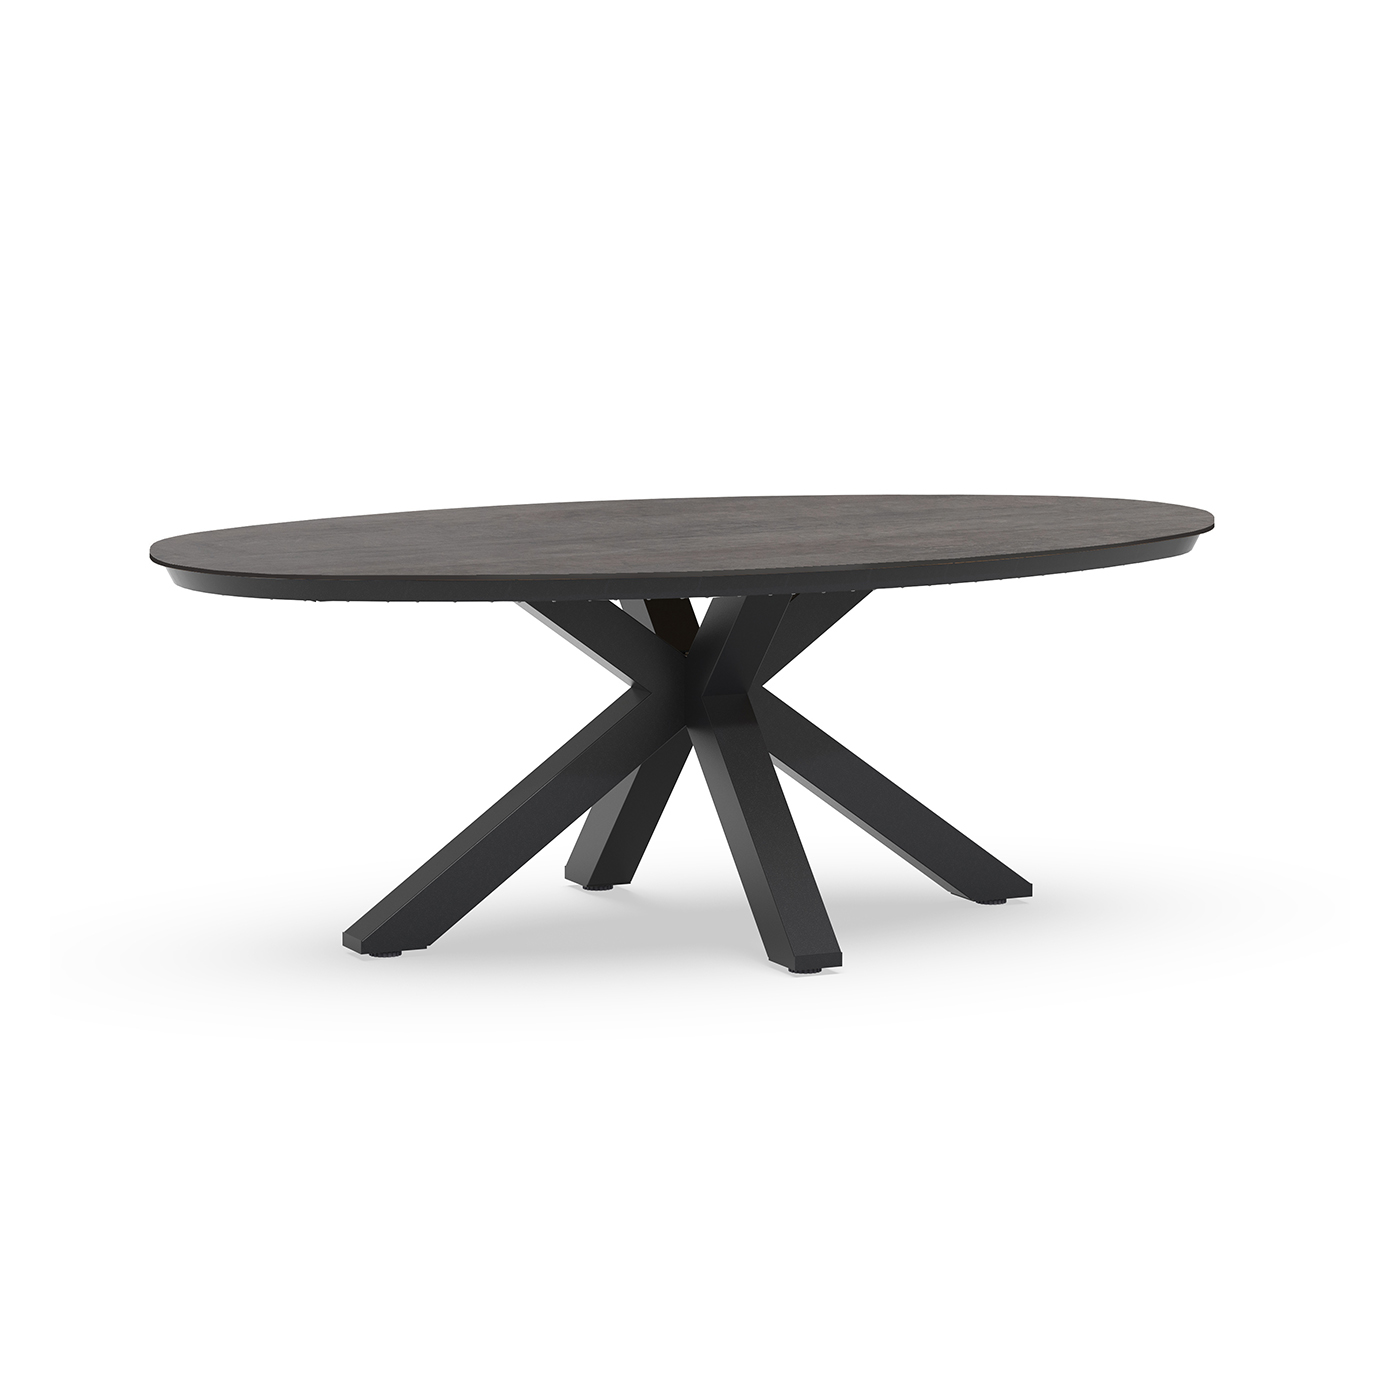 Oblong Low Dining Table Trespa Forest Grey 200 x 110 cm Charcoal